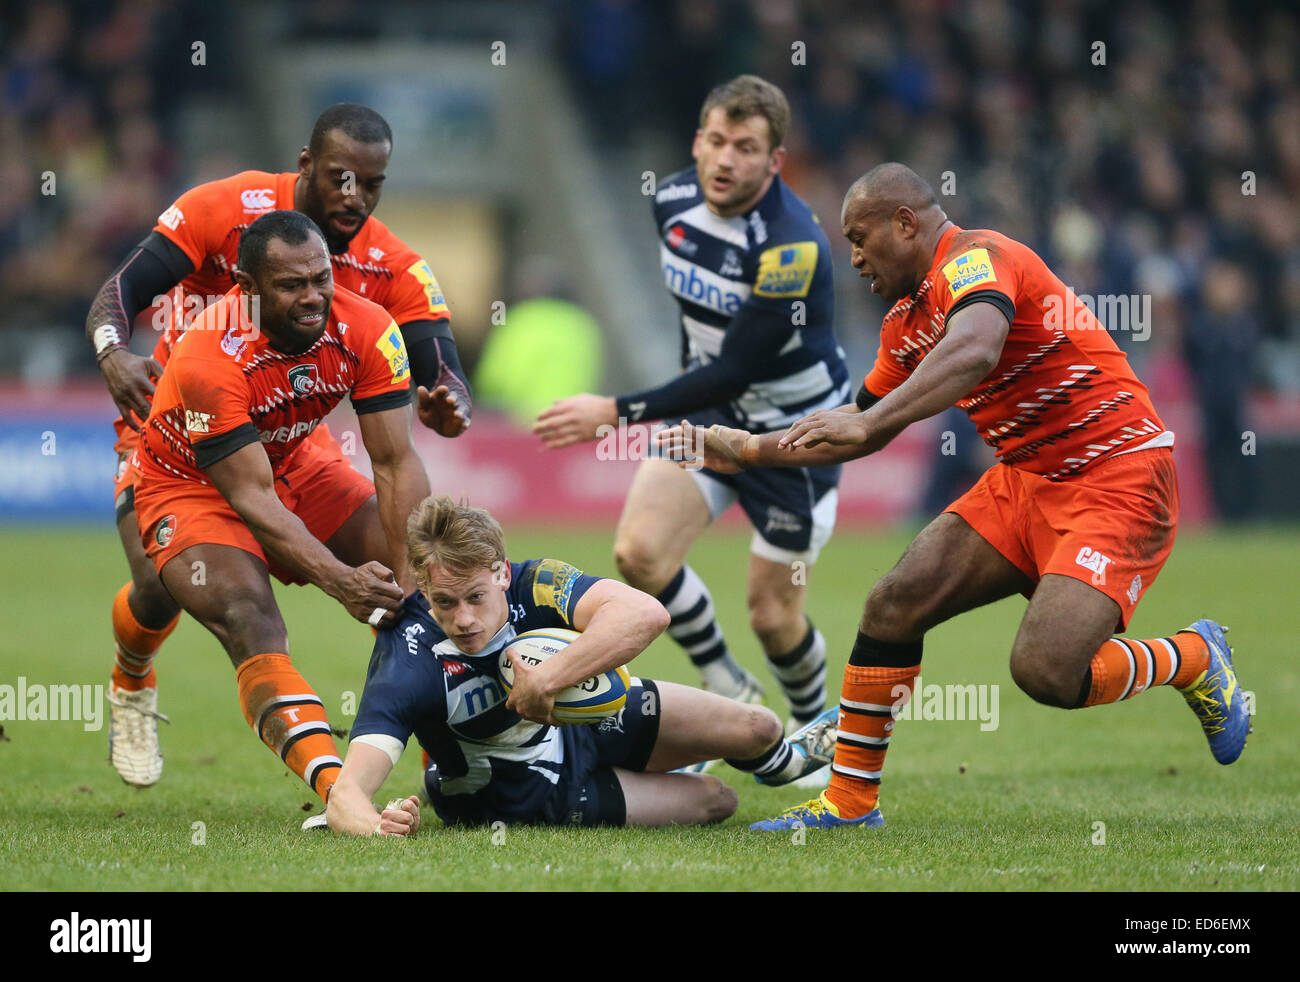 Salford, UK. 27th Dec, 2014. Michael Haley of Sale Sharks tackled by Seremaia Bai of Leicester Tigers - Aviva Premiership - Sale Sharks vs Leicester Tigers - AJ Bell Stadium - Salford - England - 27th December 2014 - Picture Simon Bellis/Sportimage. © csm/Alamy Live News Stock Photo